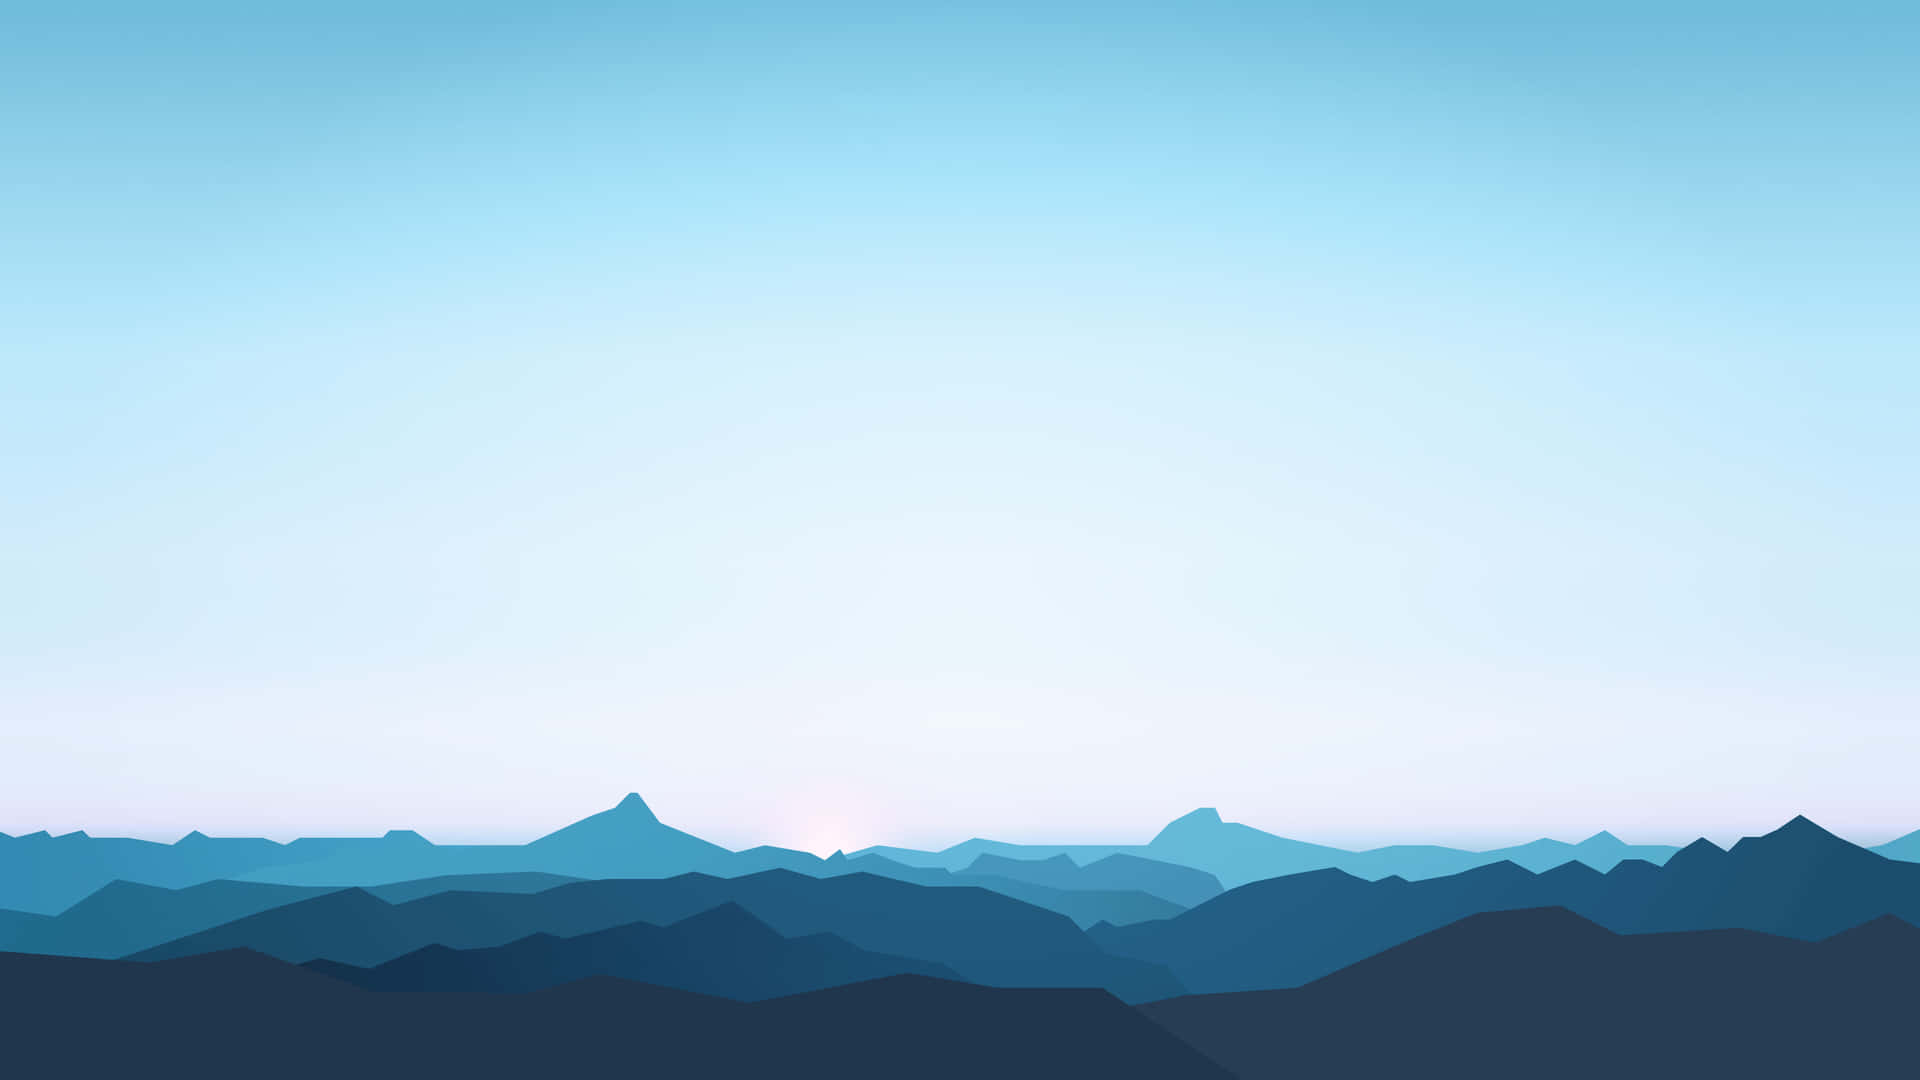 A peaceful gradient of blue and misty white Wallpaper